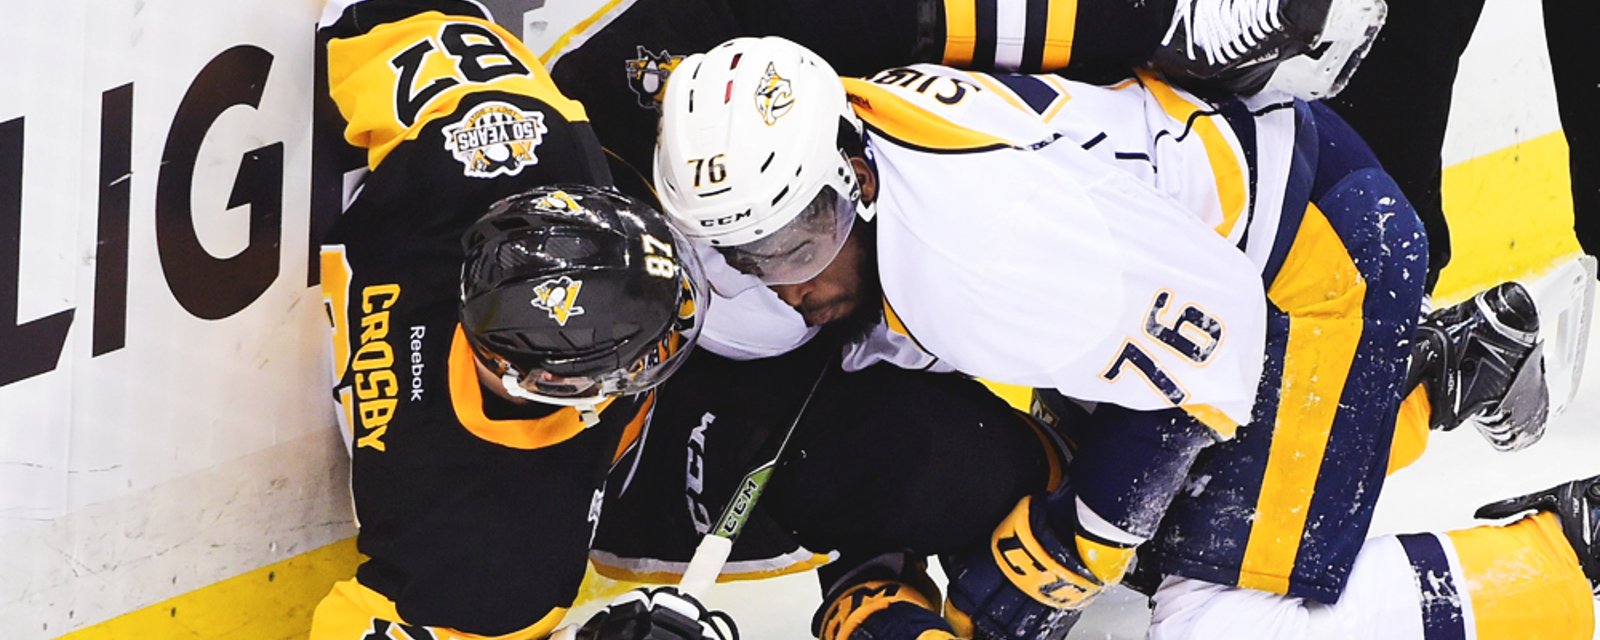 Actual audio of Sidney Crosby and P.K. Subban trash talk leaked.